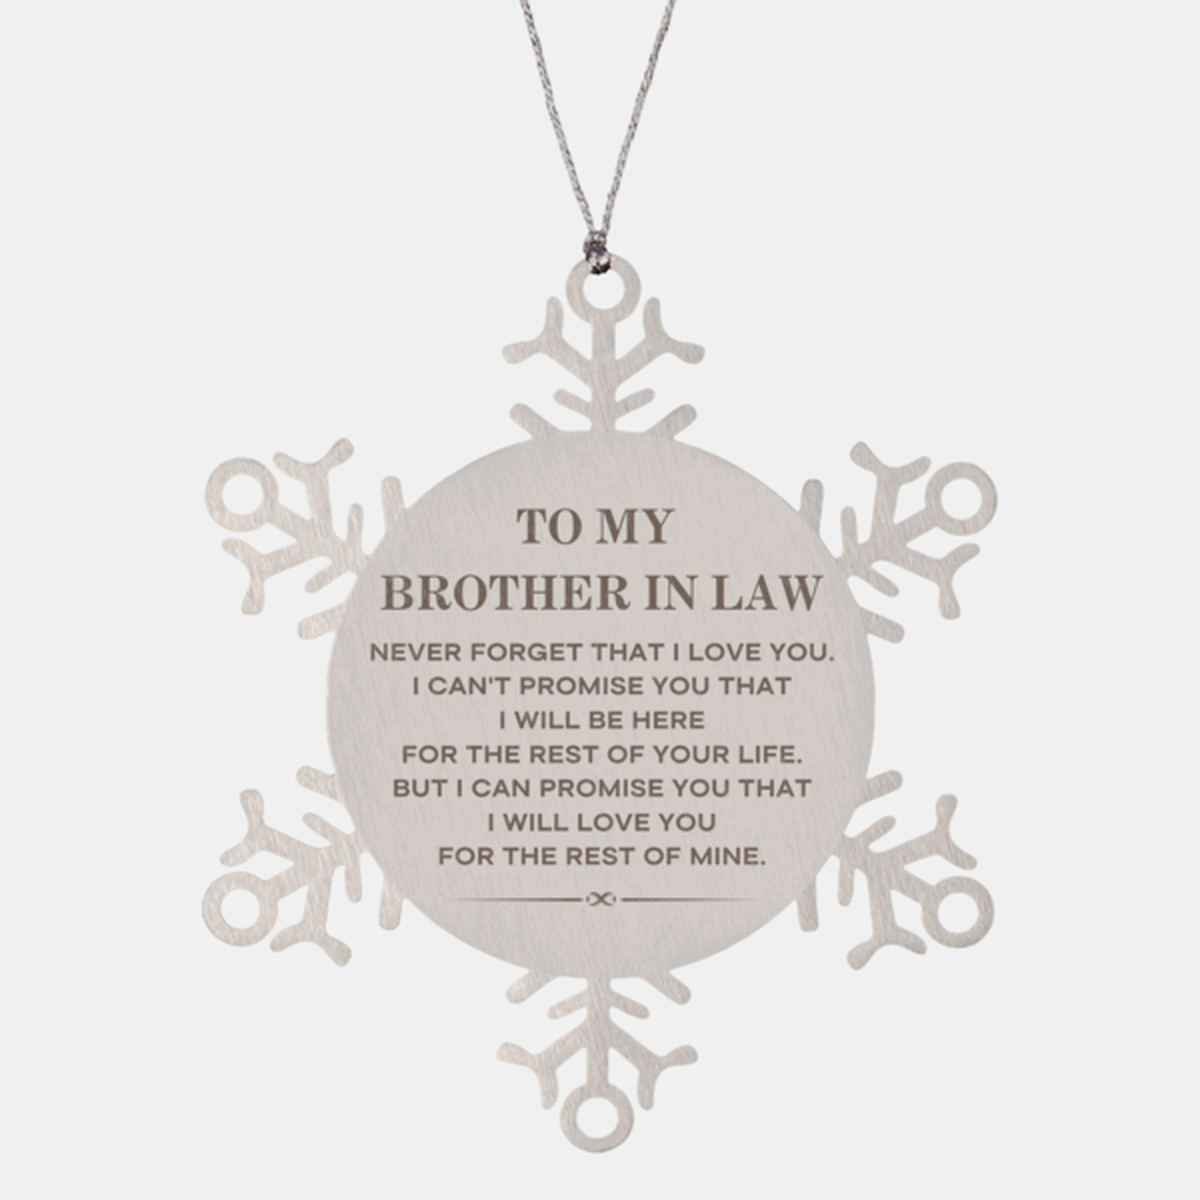 To My Brother In Law Gifts, I will love you for the rest of mine, Love Brother In Law Ornament, Birthday Christmas Unique Snowflake Ornament For Brother In Law